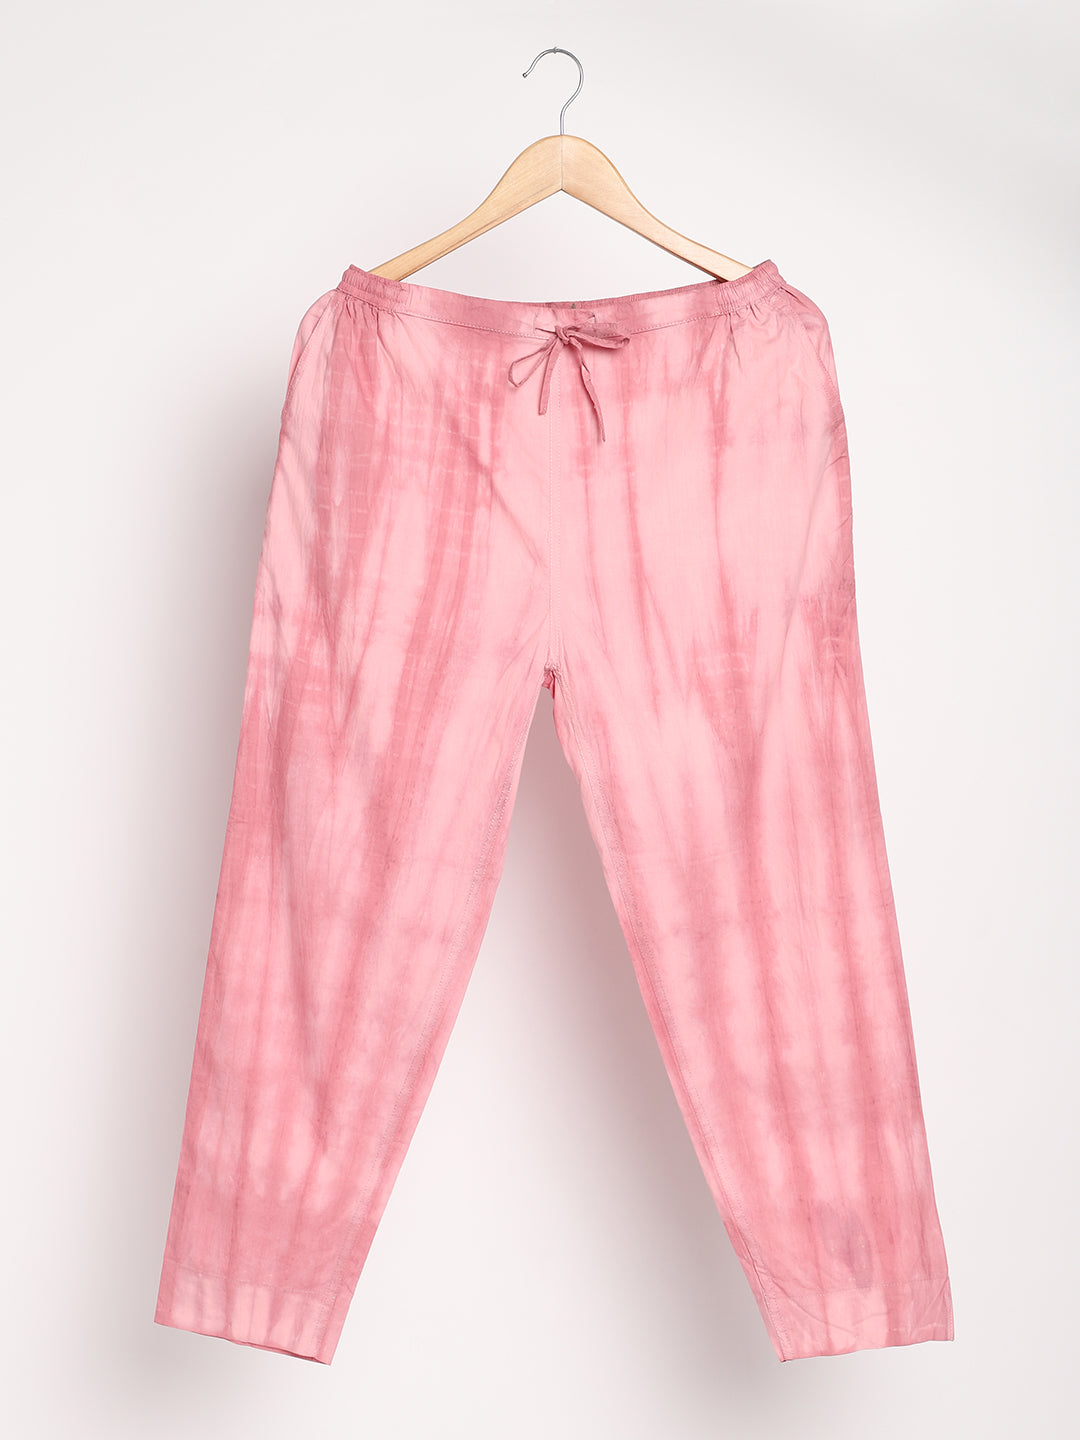 Earth Pink Women's Organic Cotton & Natural Dyed Slim Fit Tie & Dye Pants